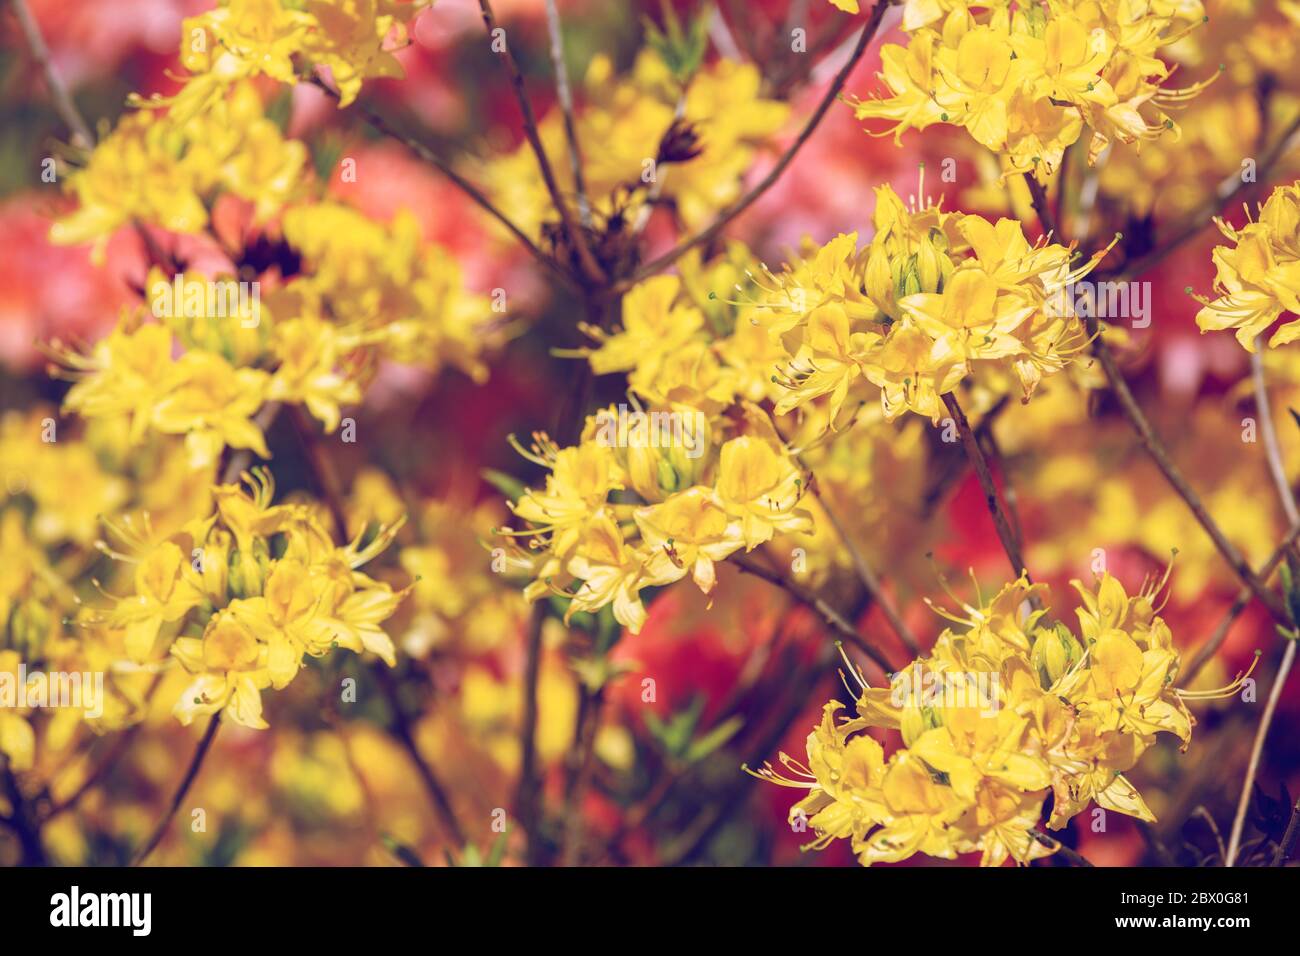 Yellow rhododendron flowers in the garden, nature flower background Stock Photo